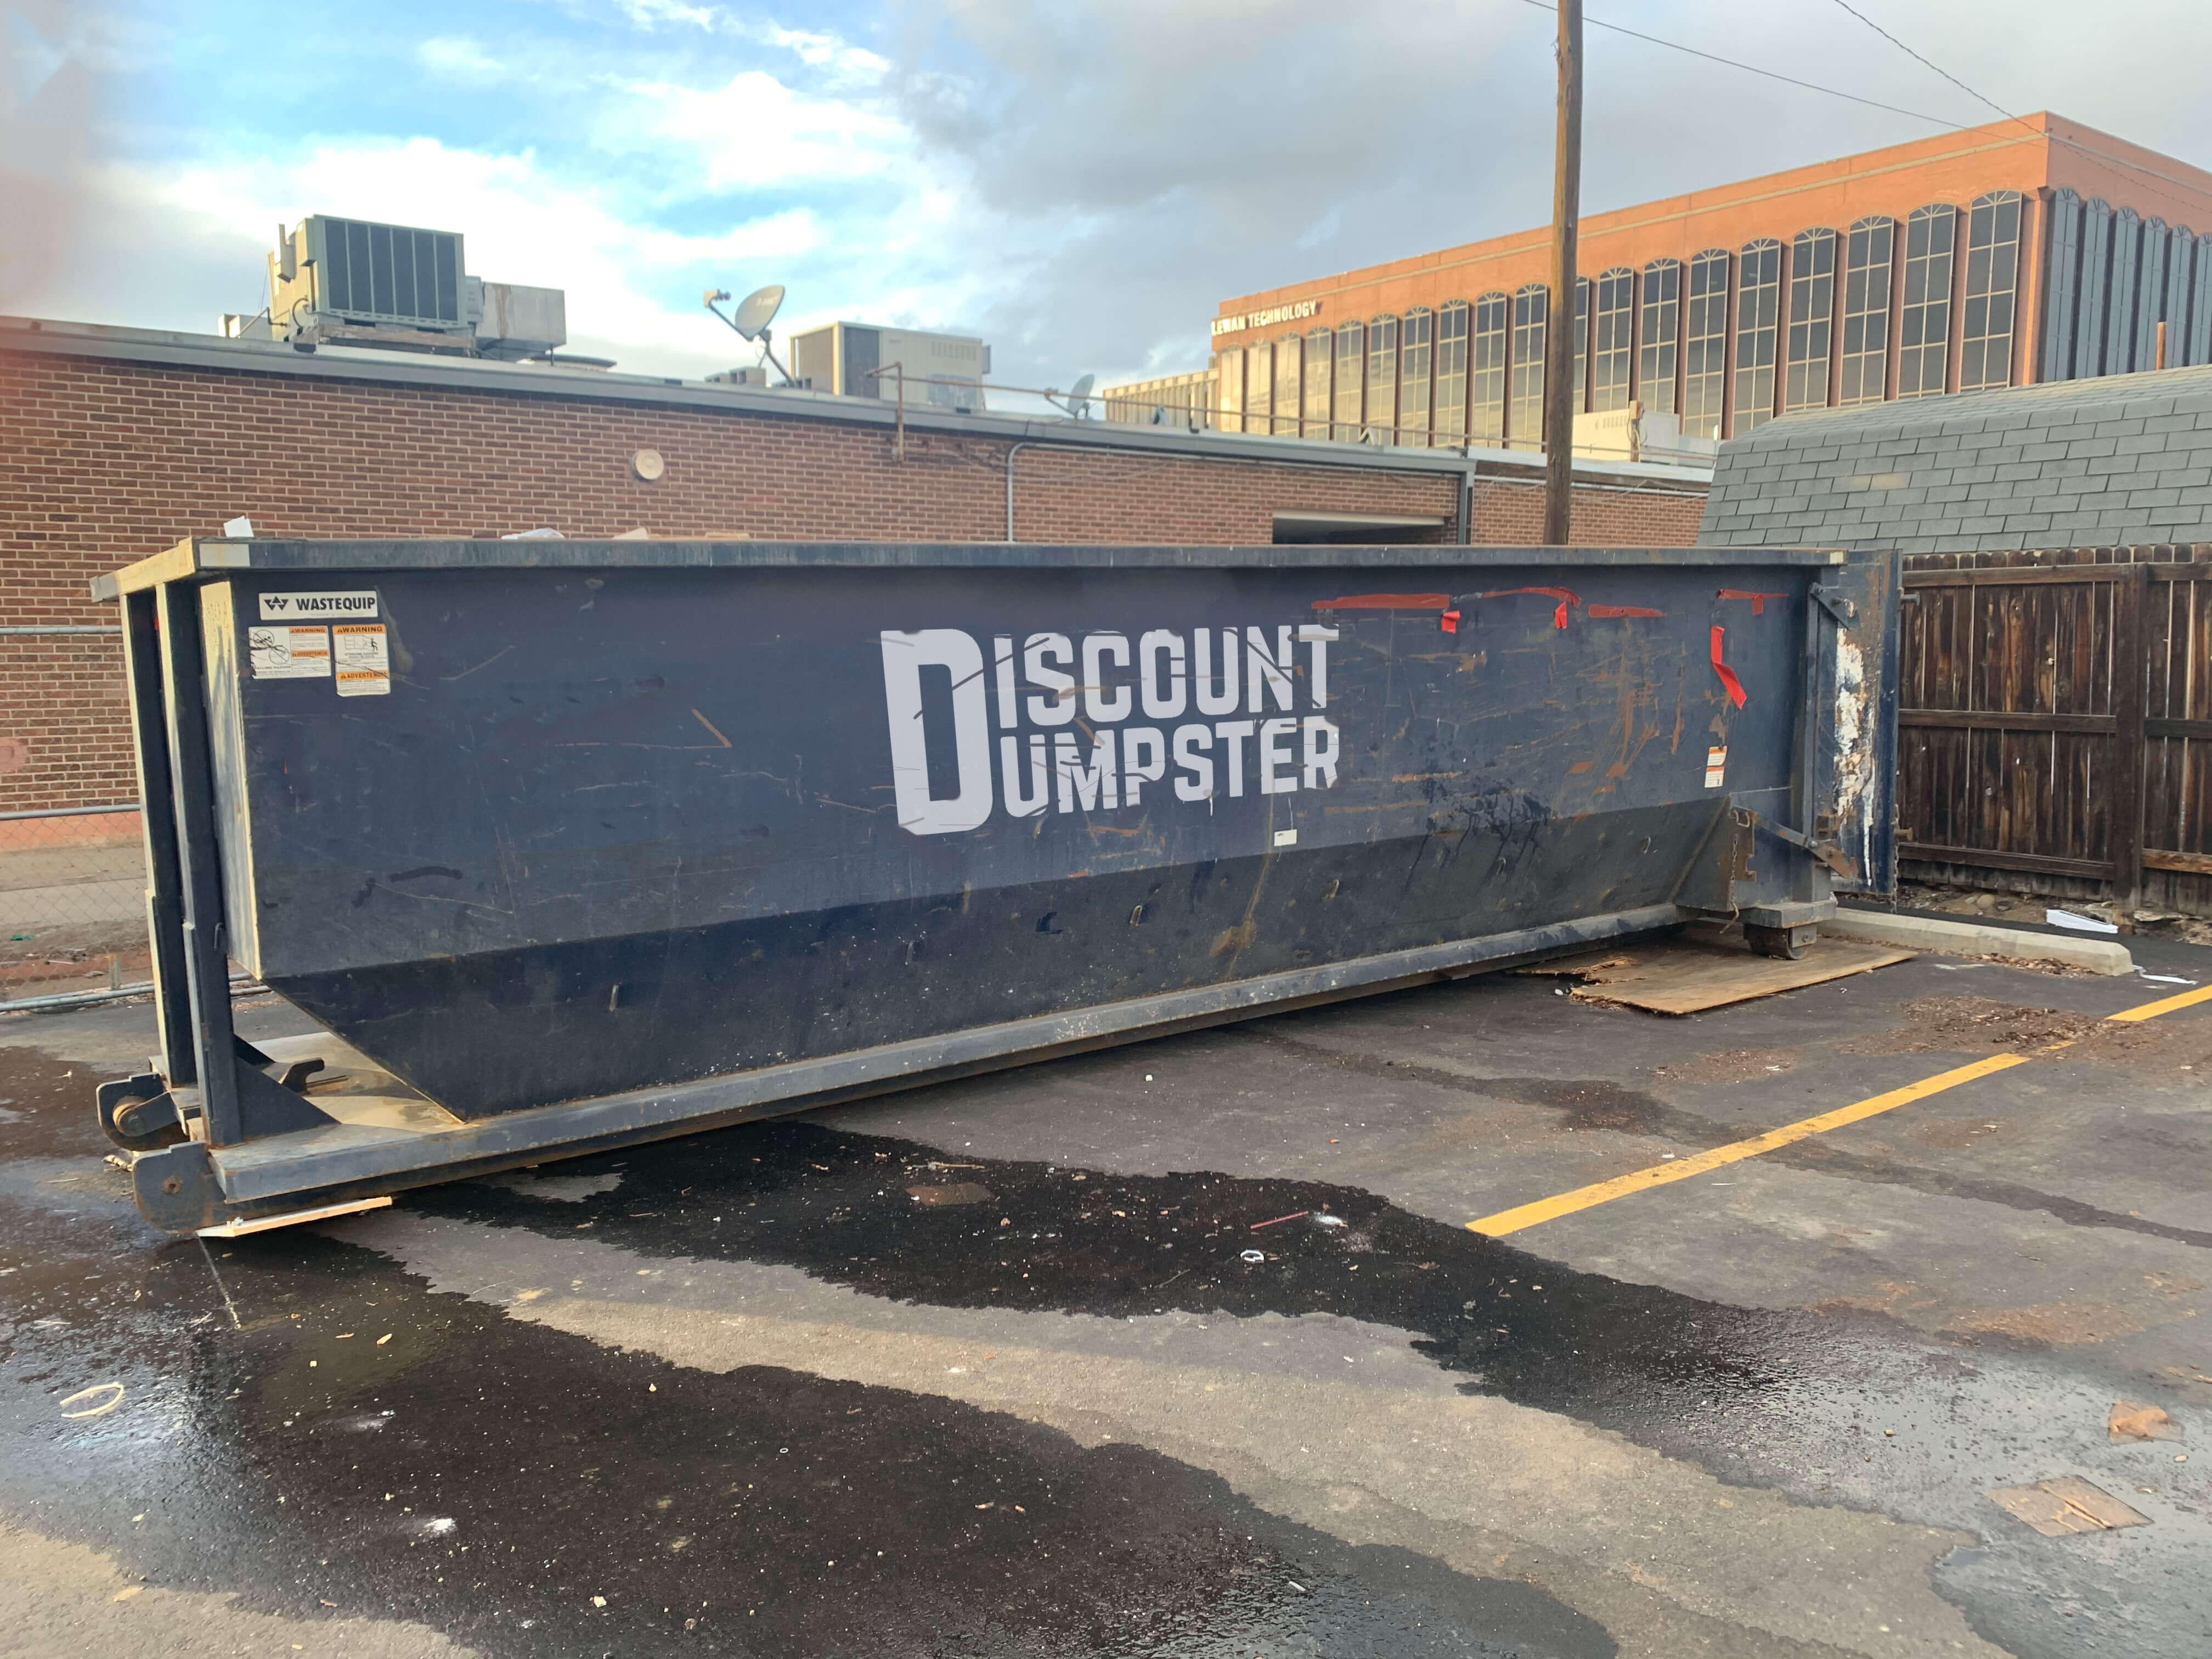 Discount dumpster has roll off dumpsters for home or commercial use in chicago il